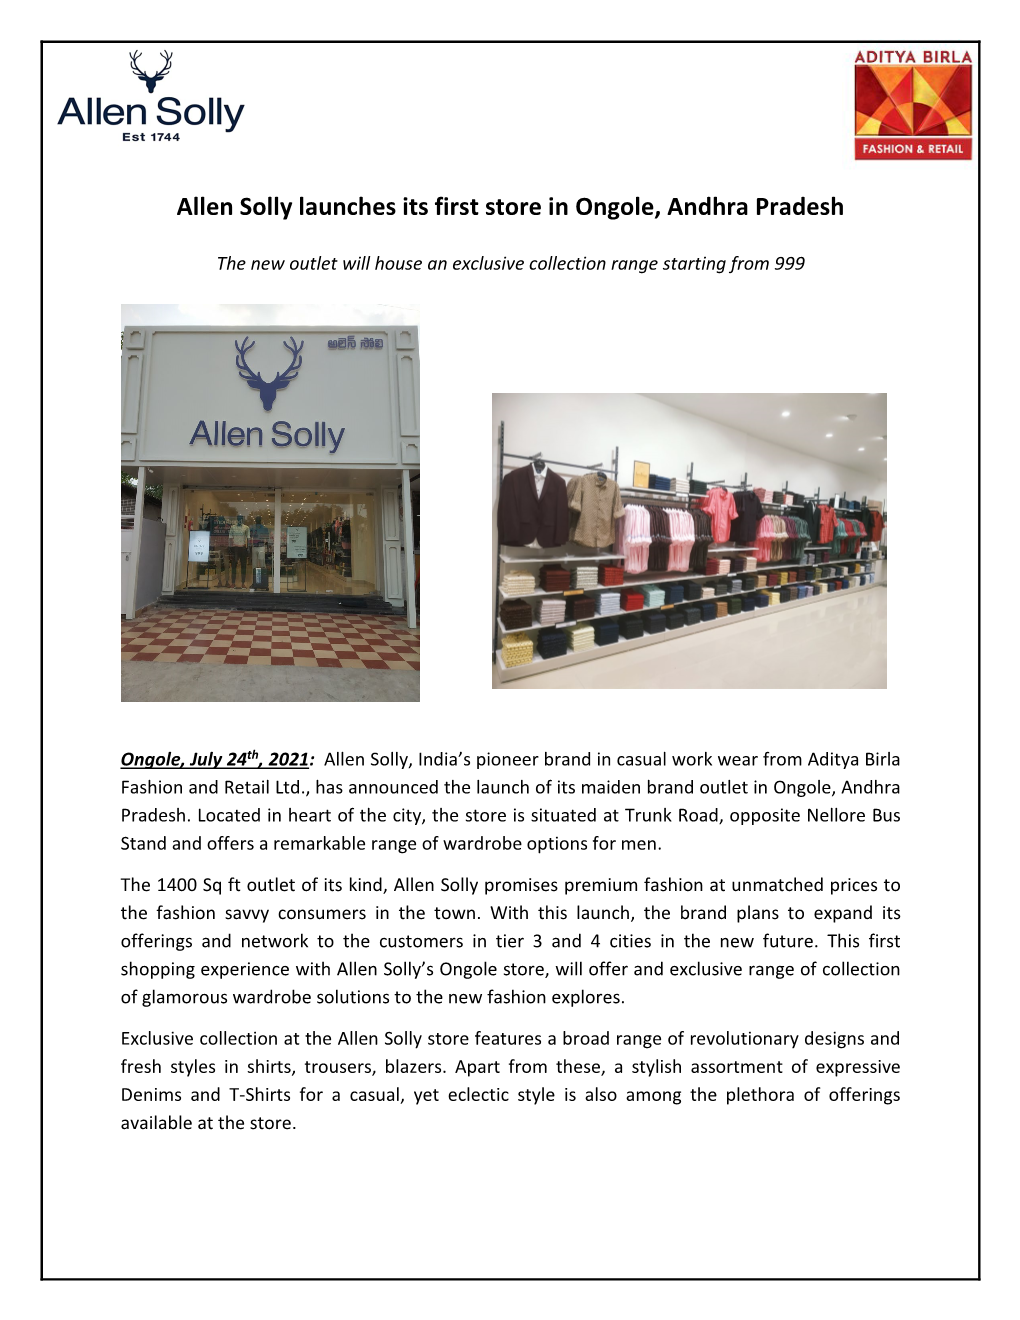 Allen Solly Launches Its First Store in Ongole, Andhra Pradesh